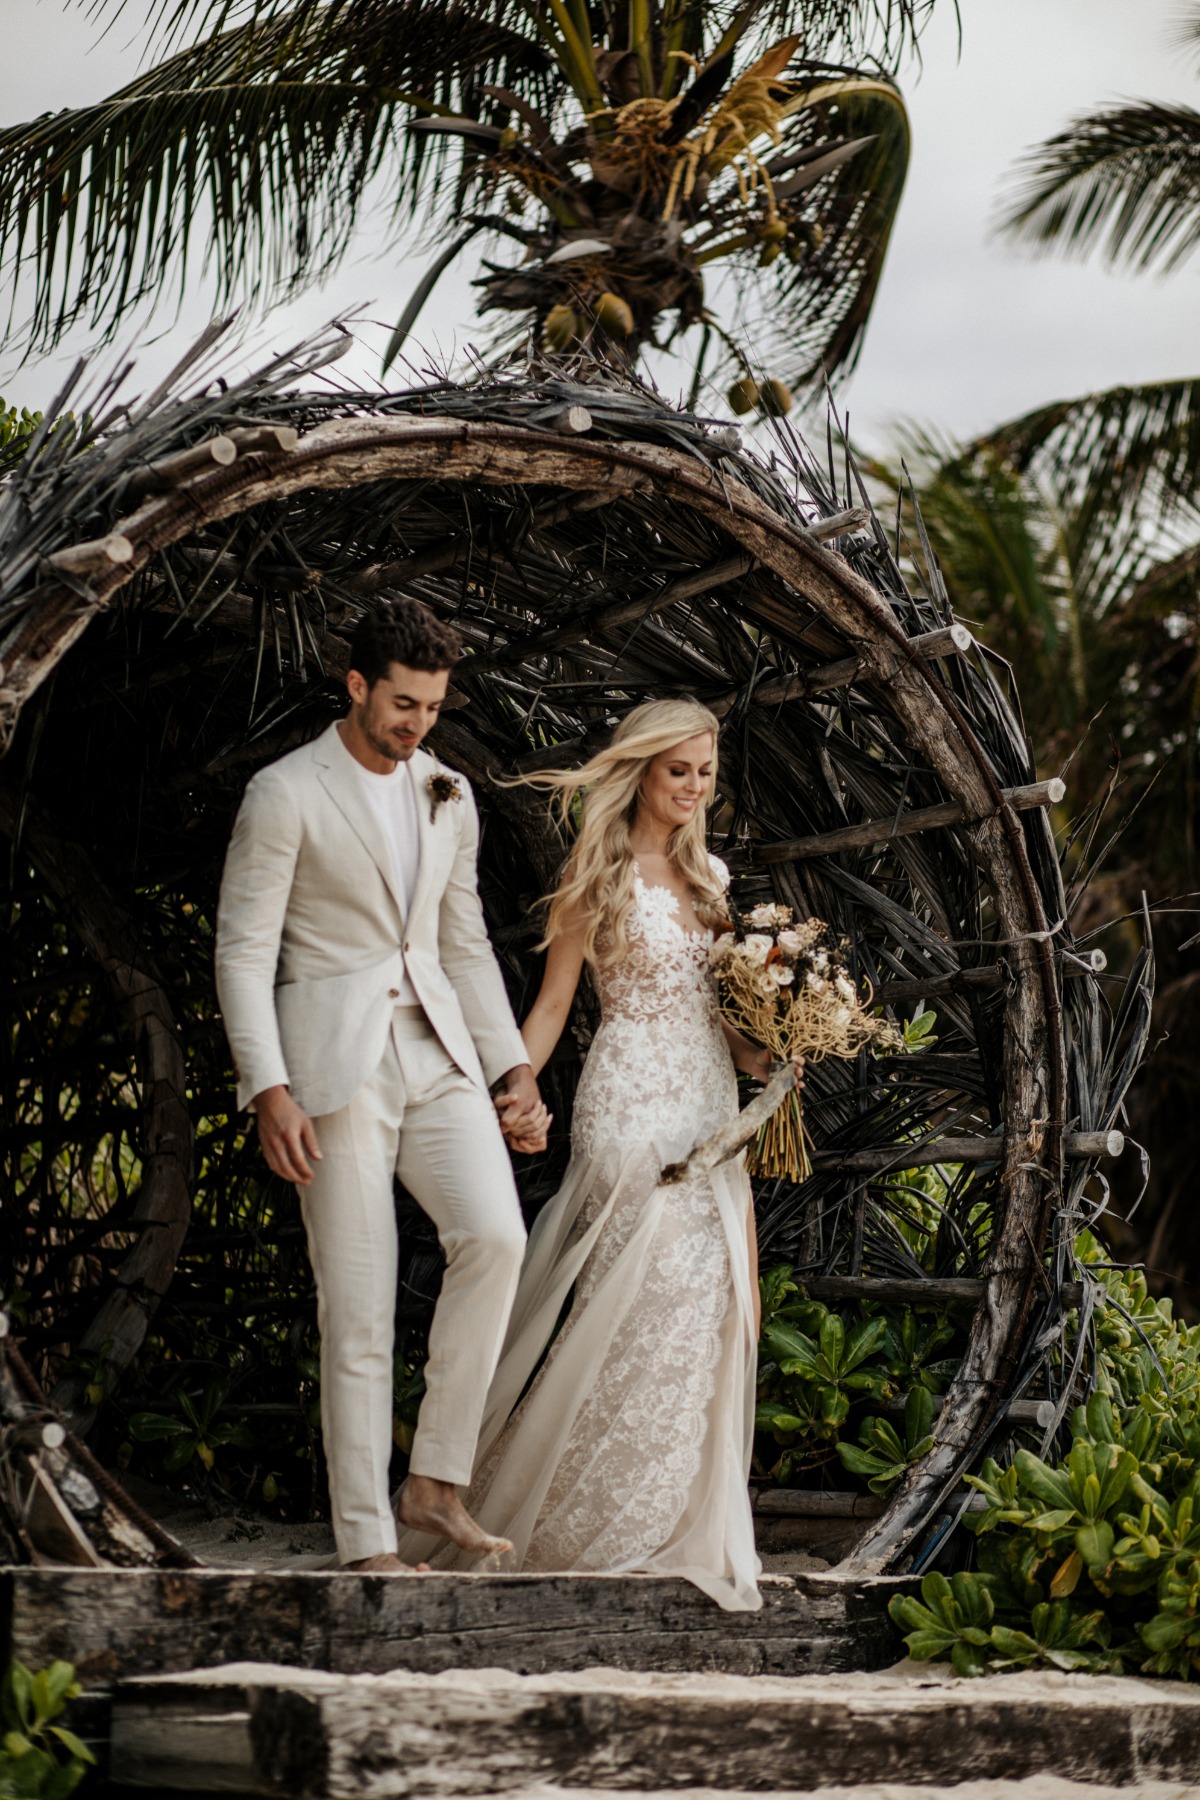 Love and Nature–An Intimate Elopement In Tulum